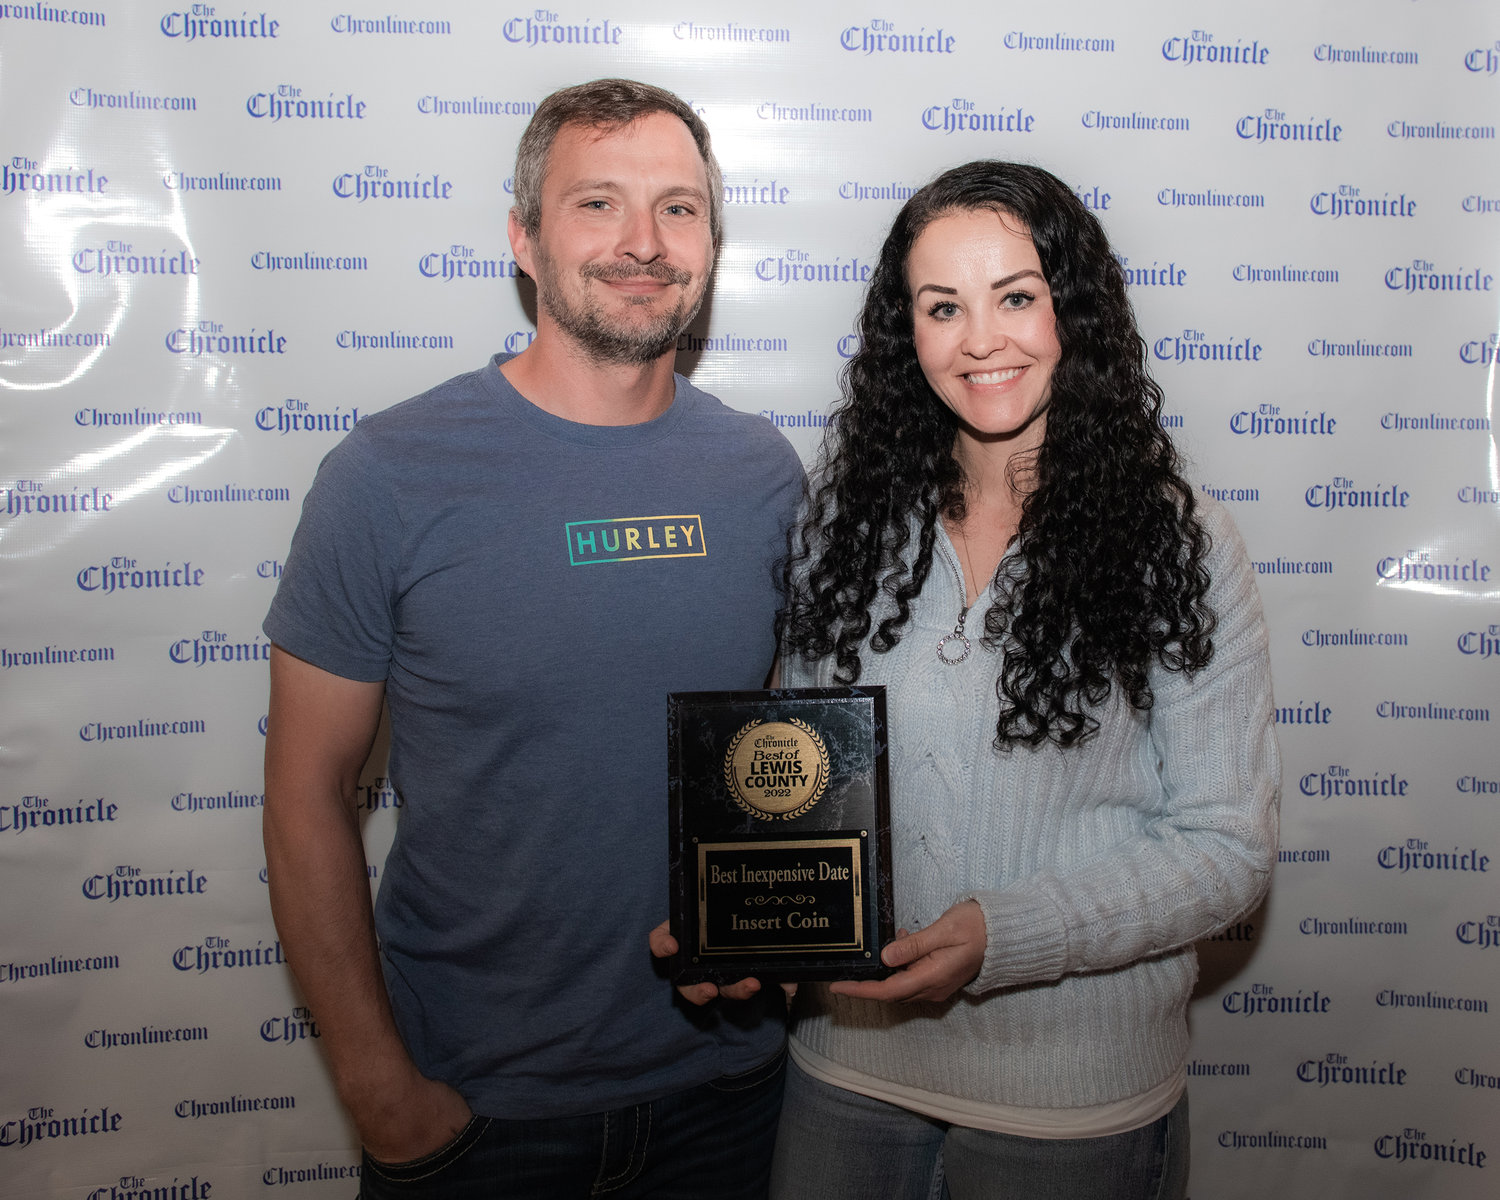 Insert Coin won “Best Family Entertainment Spot and Best Inexpensive Date” during the 2022 Best of Lewis County event hosted by The Chronicle at The Juice Box Thursday evening in Centralia.